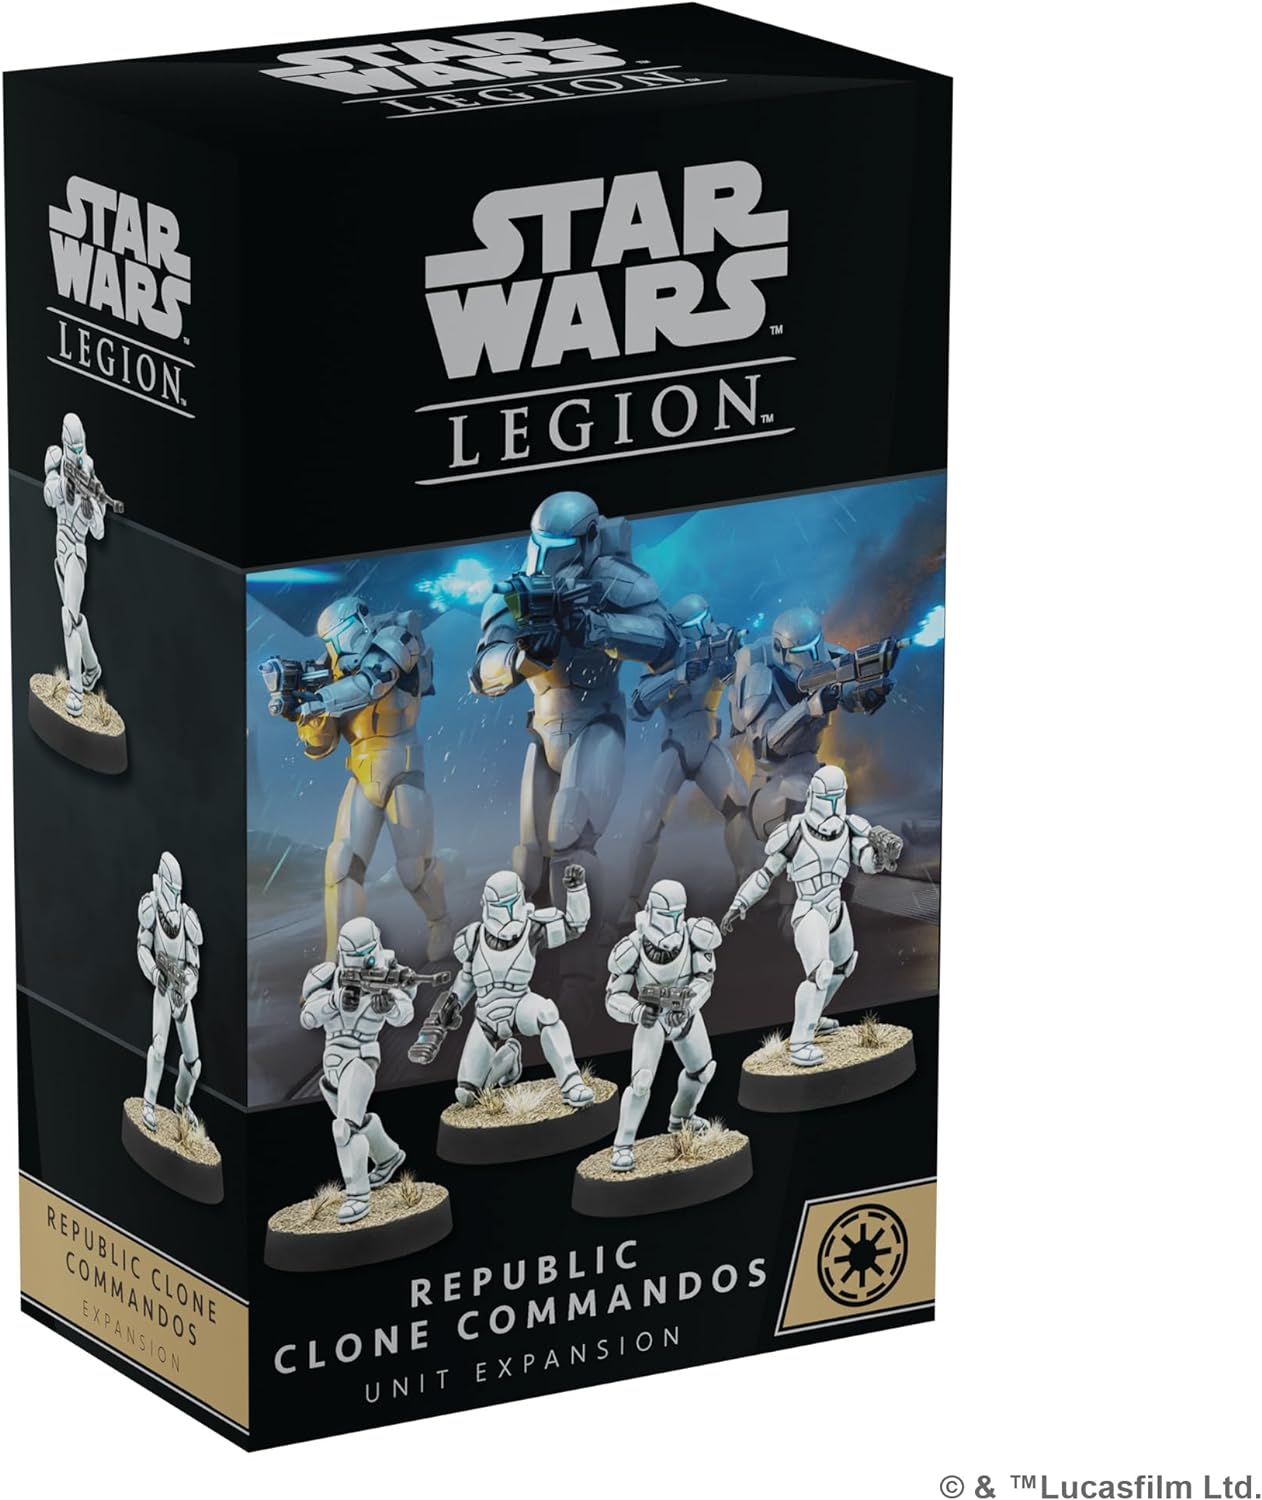 Star Wars: Legion Republic Clone Commandos Expansion - Elite Soldiers! Tabletop Miniatures Strategy Game for Kids & Adults, Ages 14+, 2 Players, 3 Hour Playtime, Made